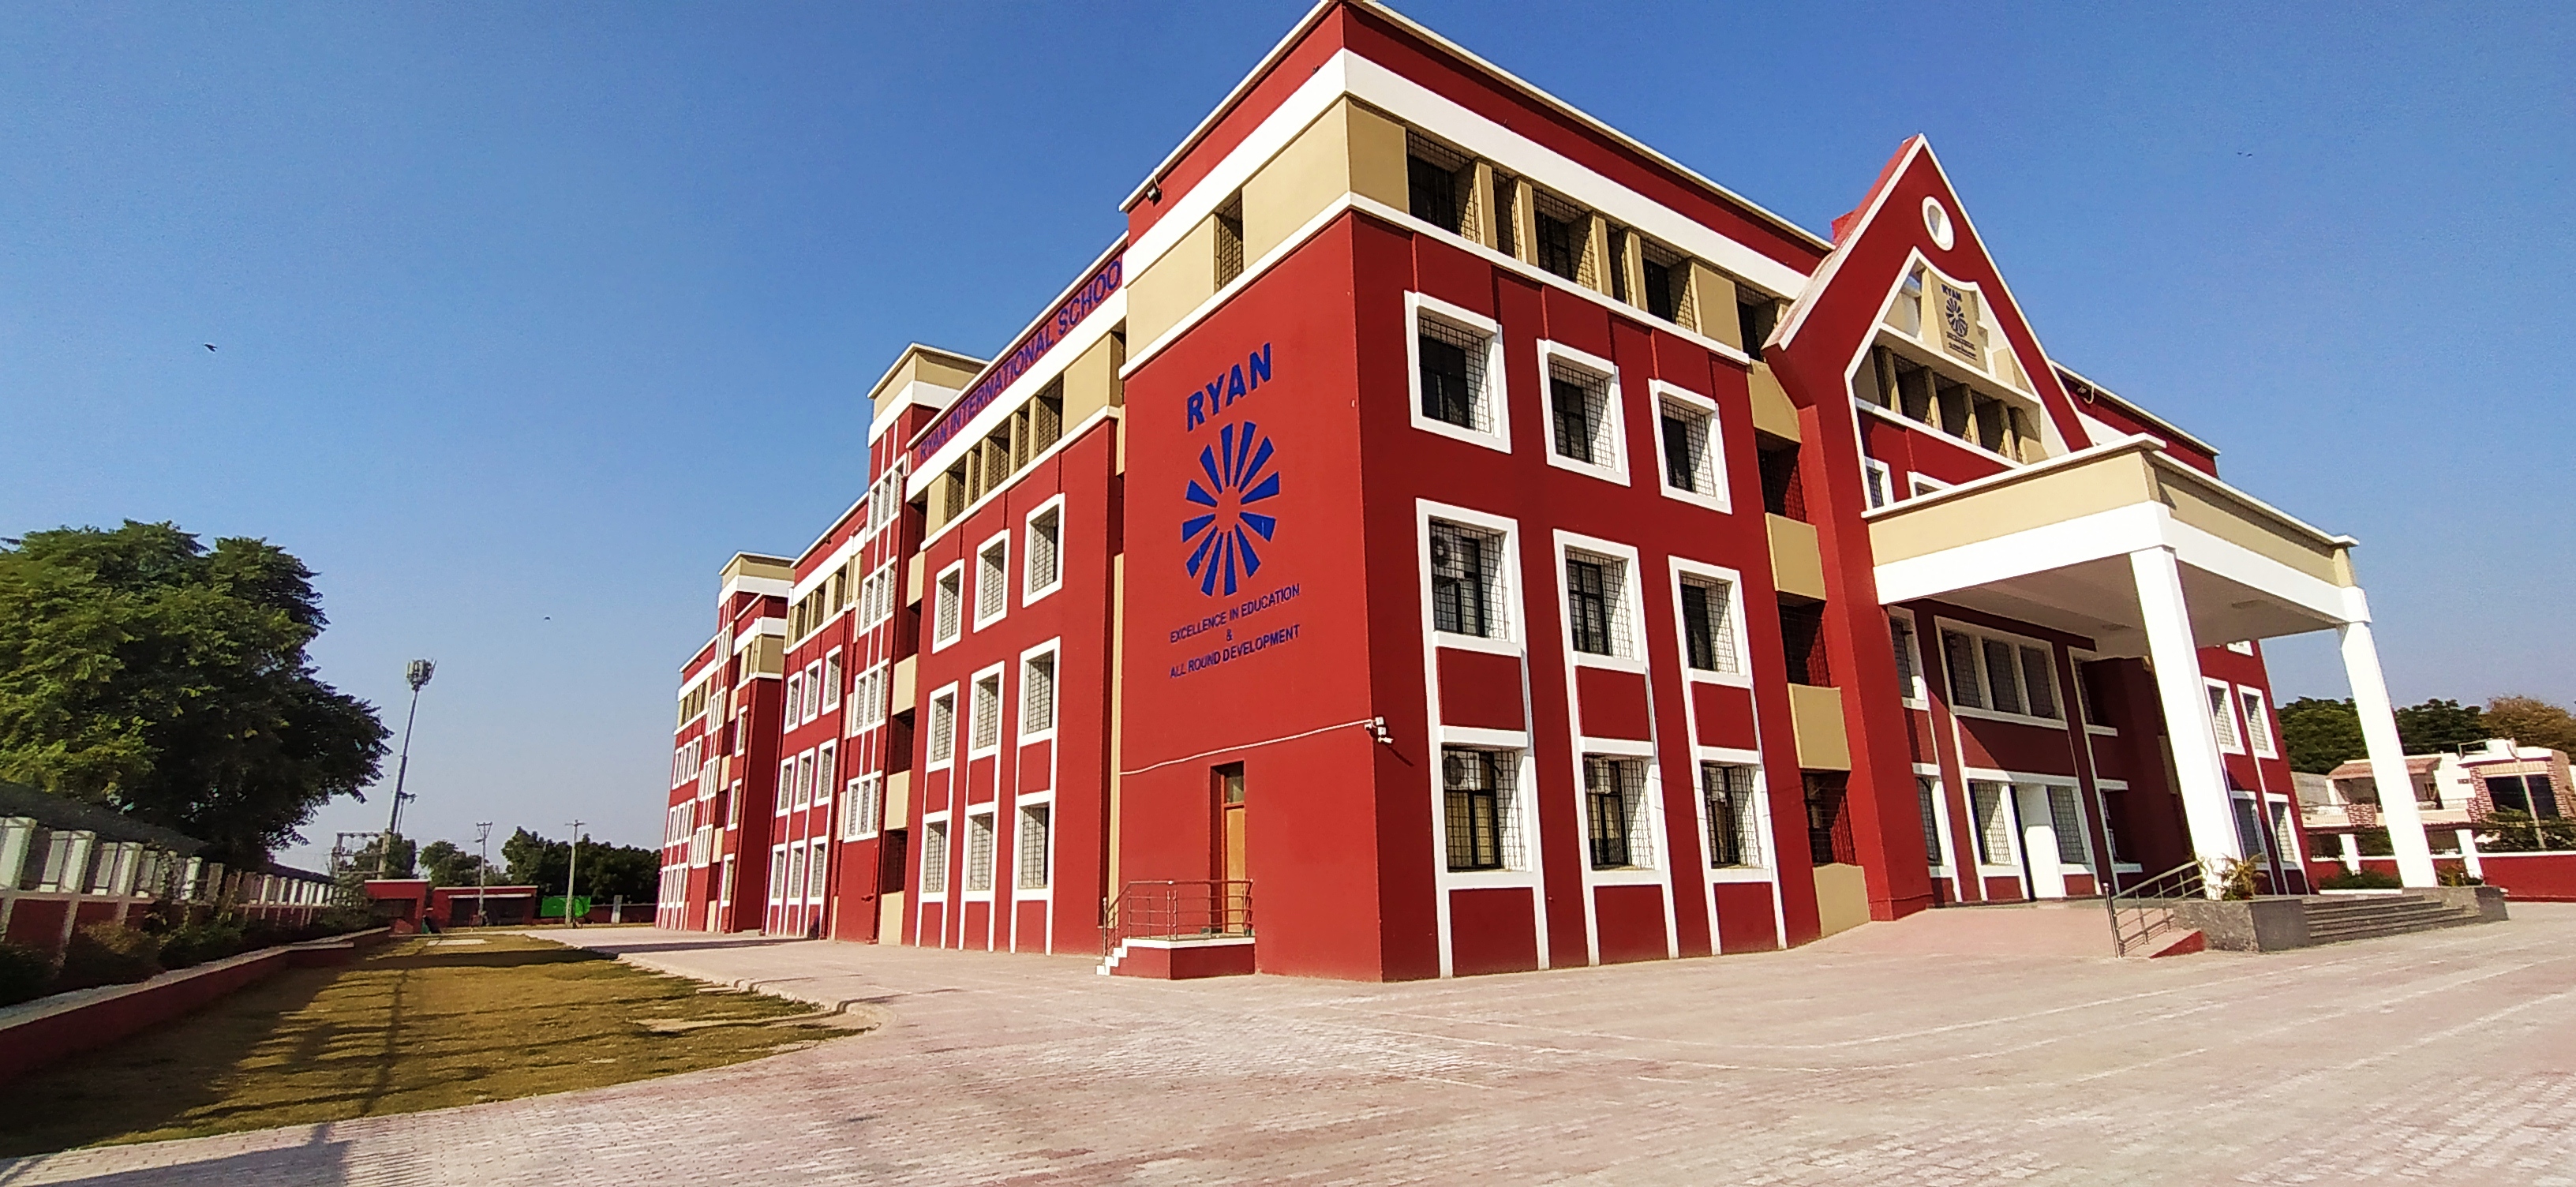 Letting young minds take charge - Ryan International School, Bikaner Ryan International School - Ryan Group